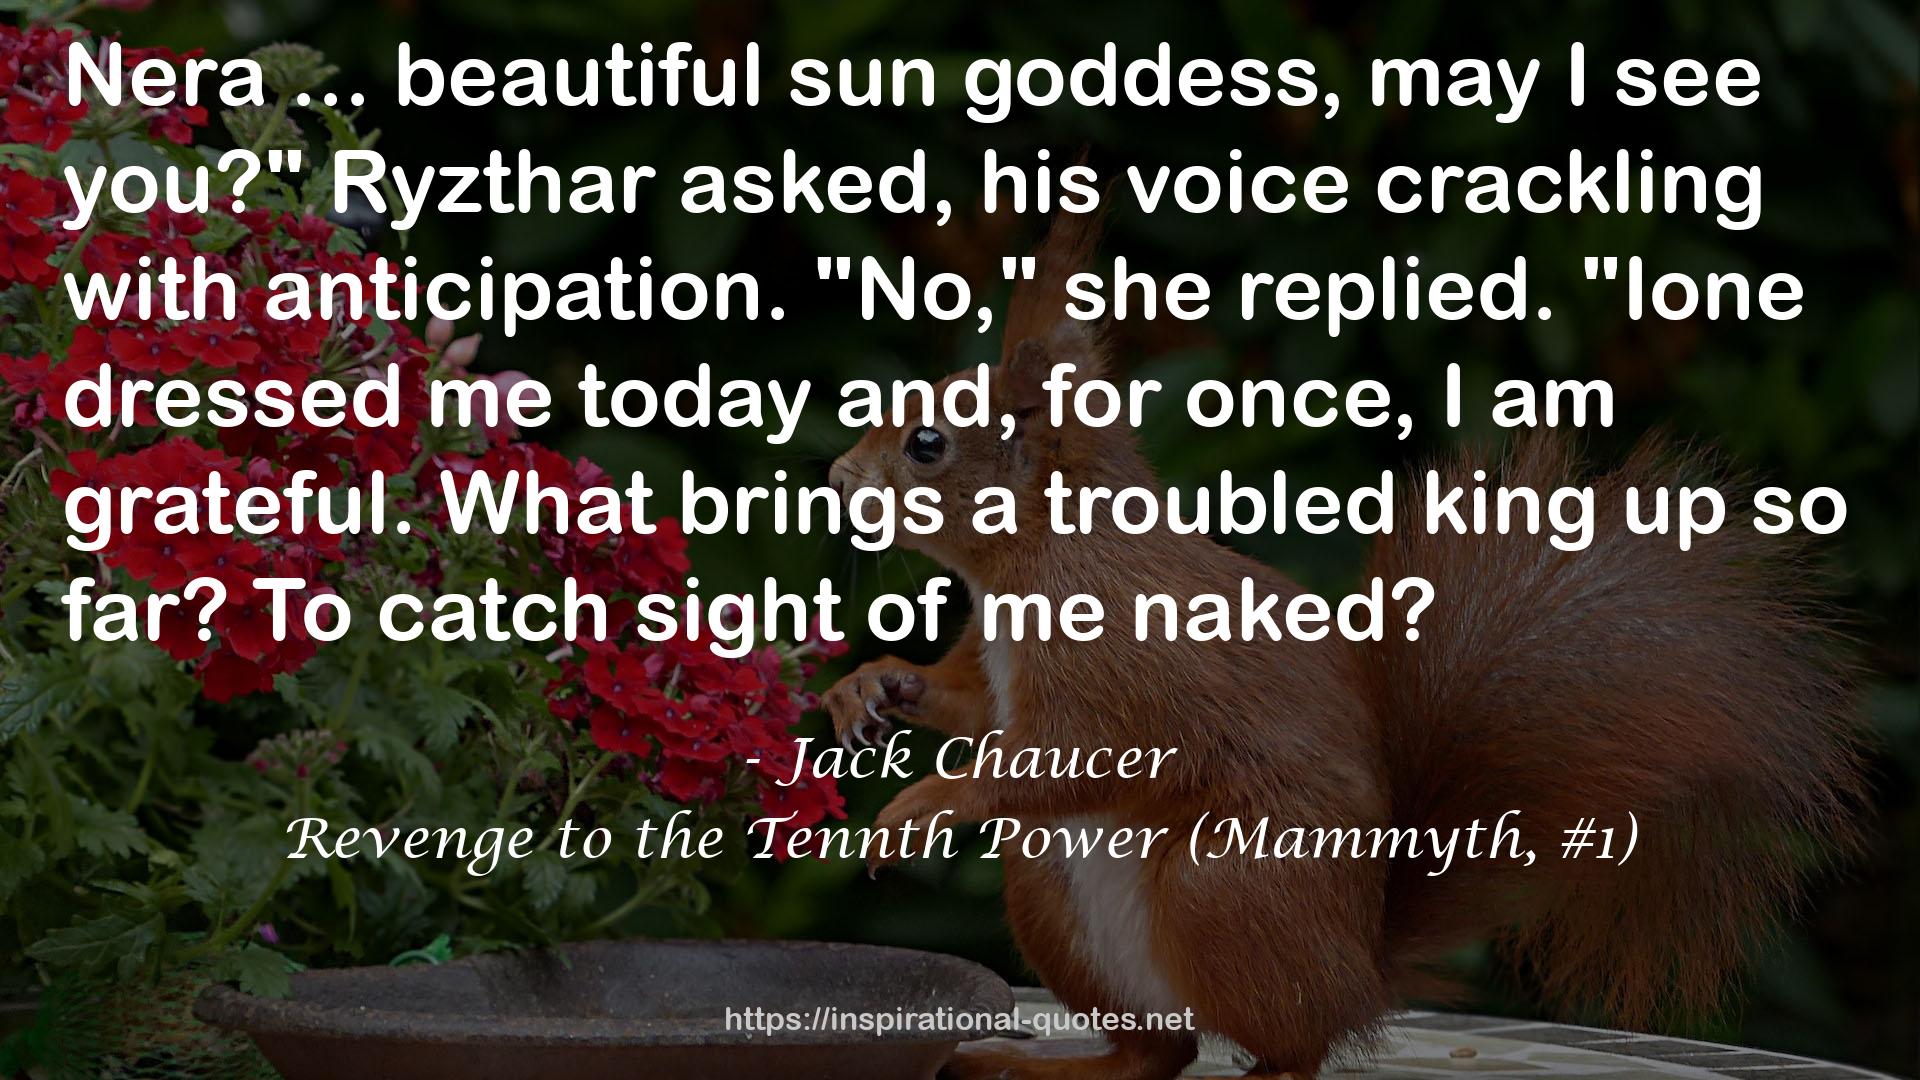 Revenge to the Tennth Power (Mammyth, #1) QUOTES